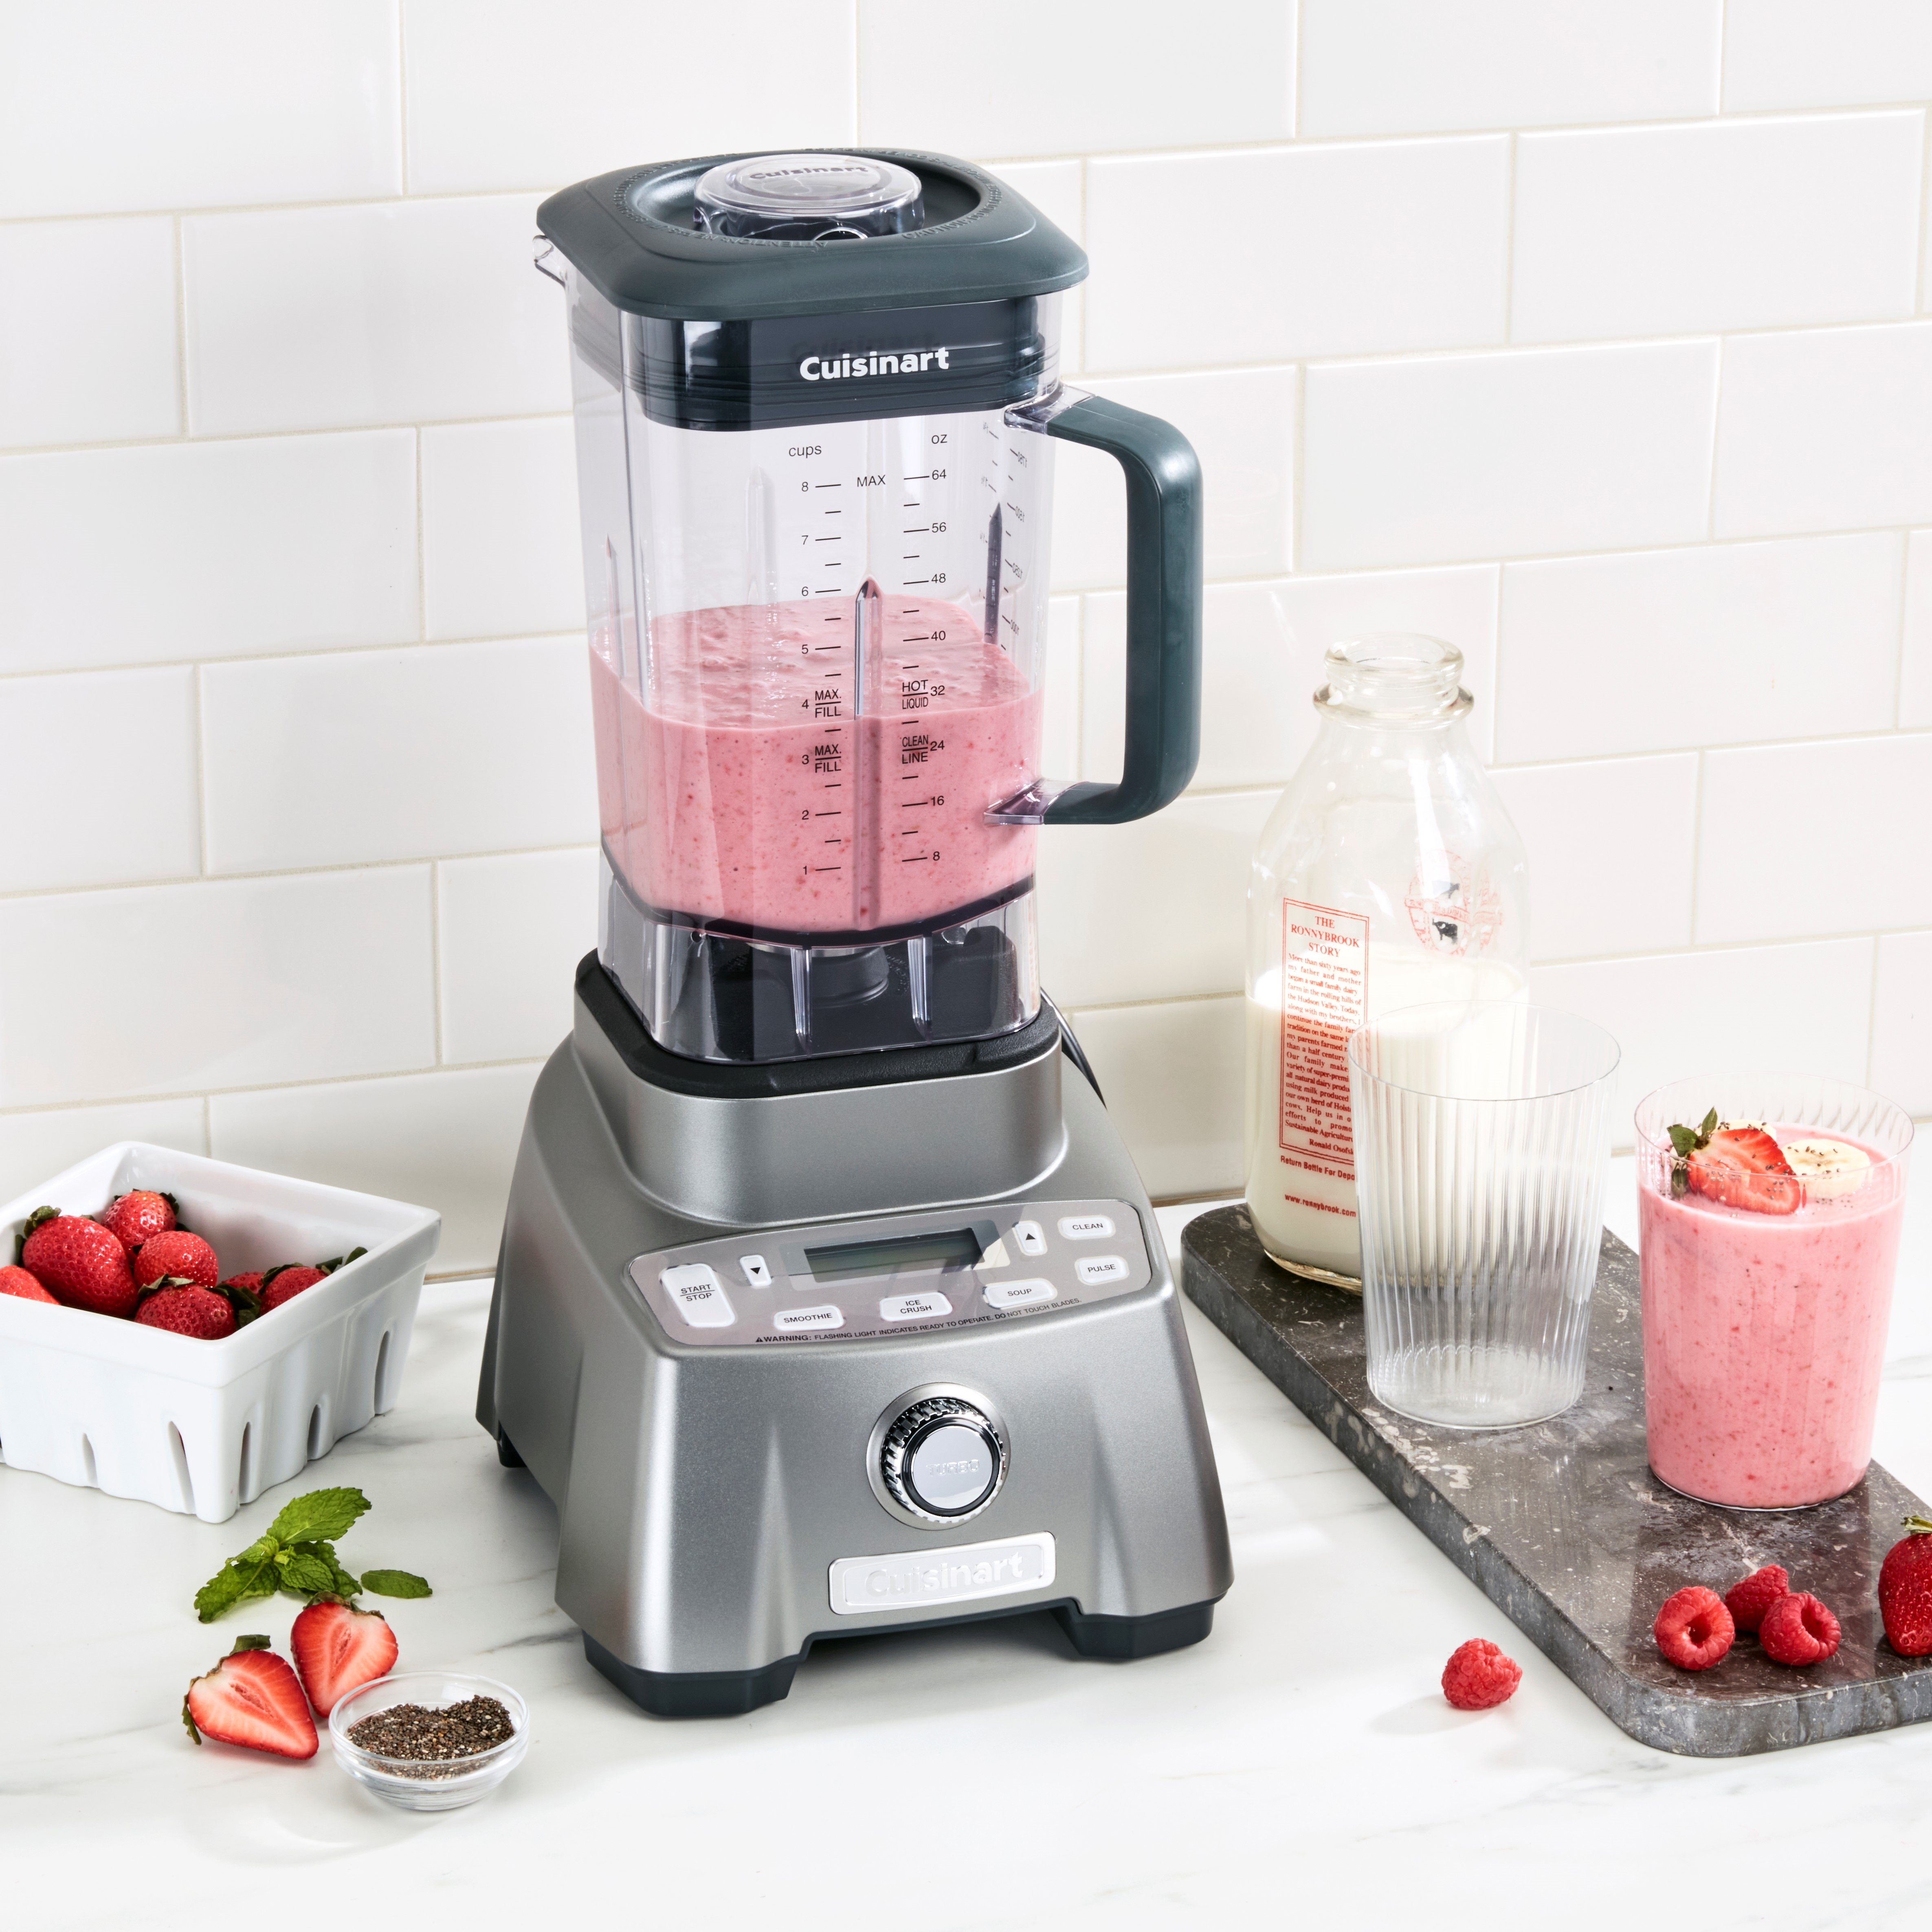 https://www.cuisinart.com/globalassets/cuisinart-image-feed/cbt-2000p1/cbt2000p_ff_strawberry_smoothie_finished.jpg